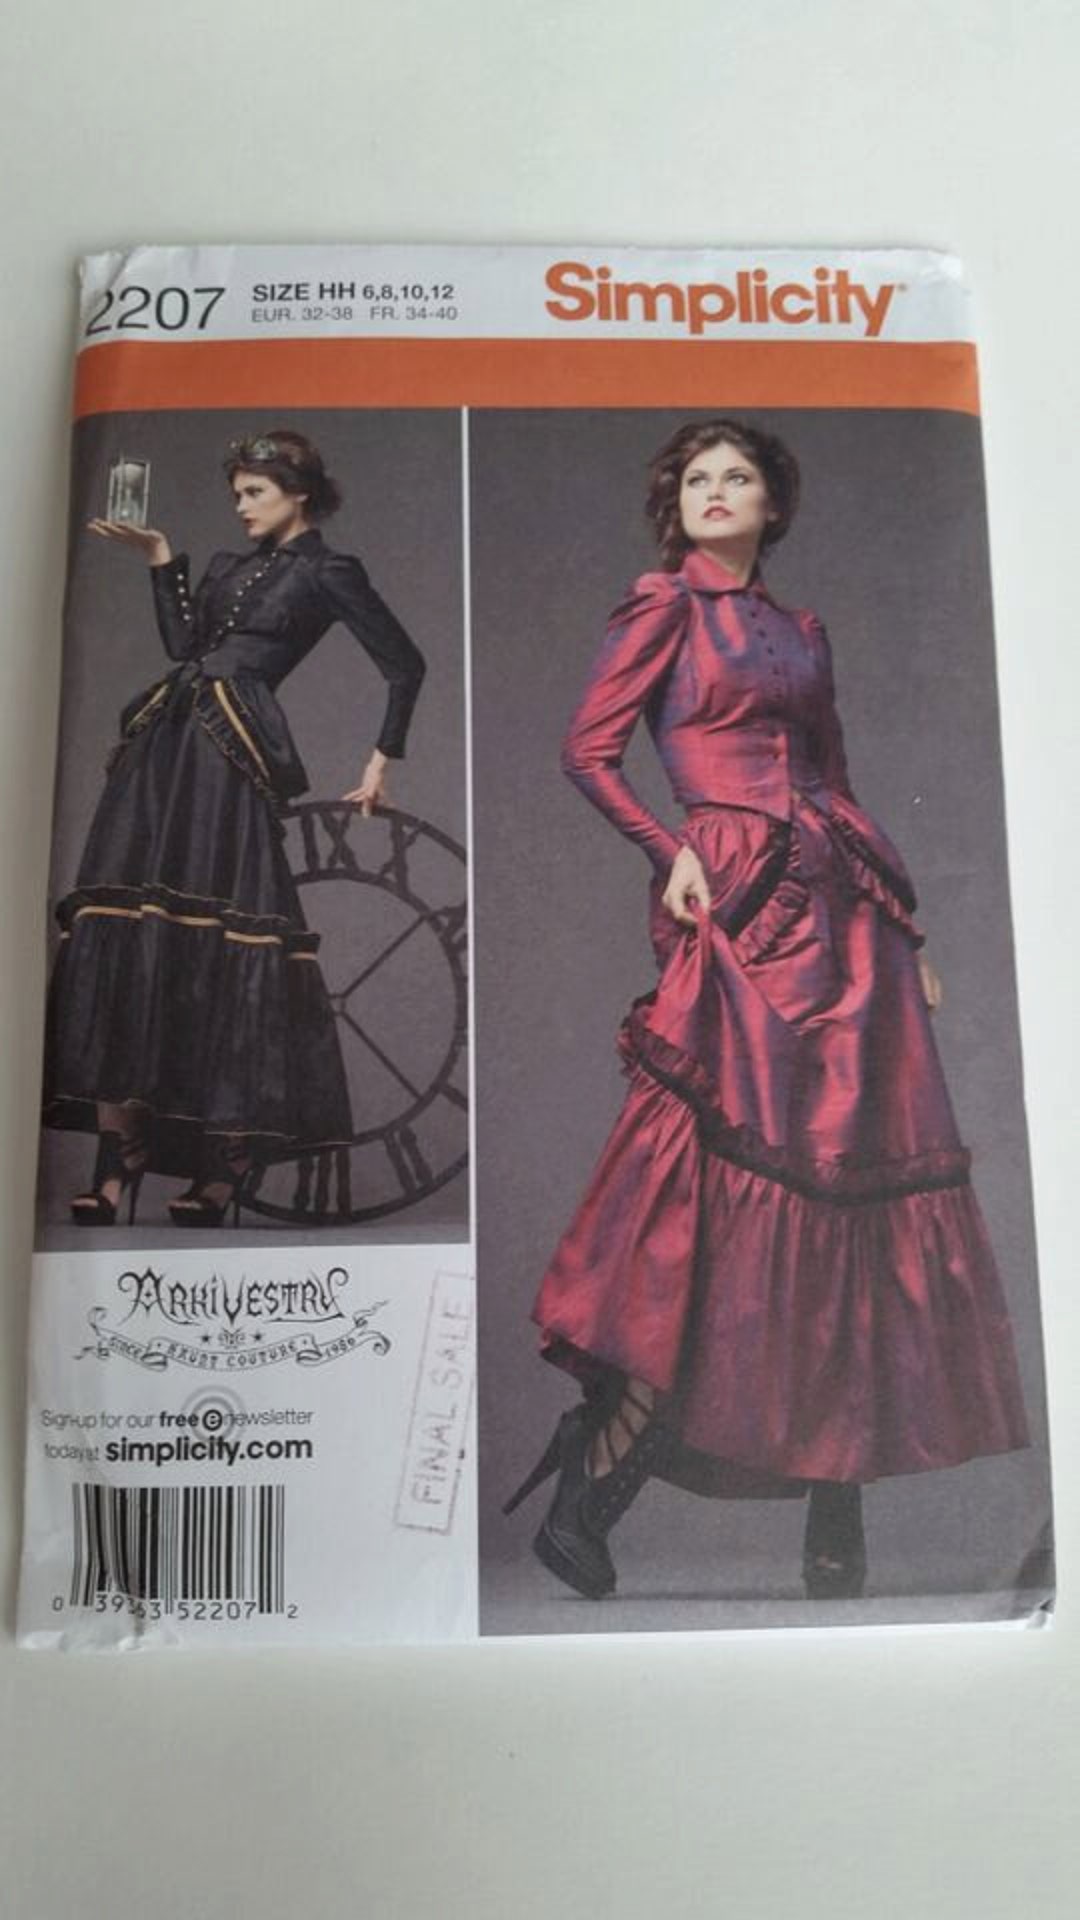 Simplicity Arkivestry Sewing Pattern 2207 Misses' Costumes - Etsy